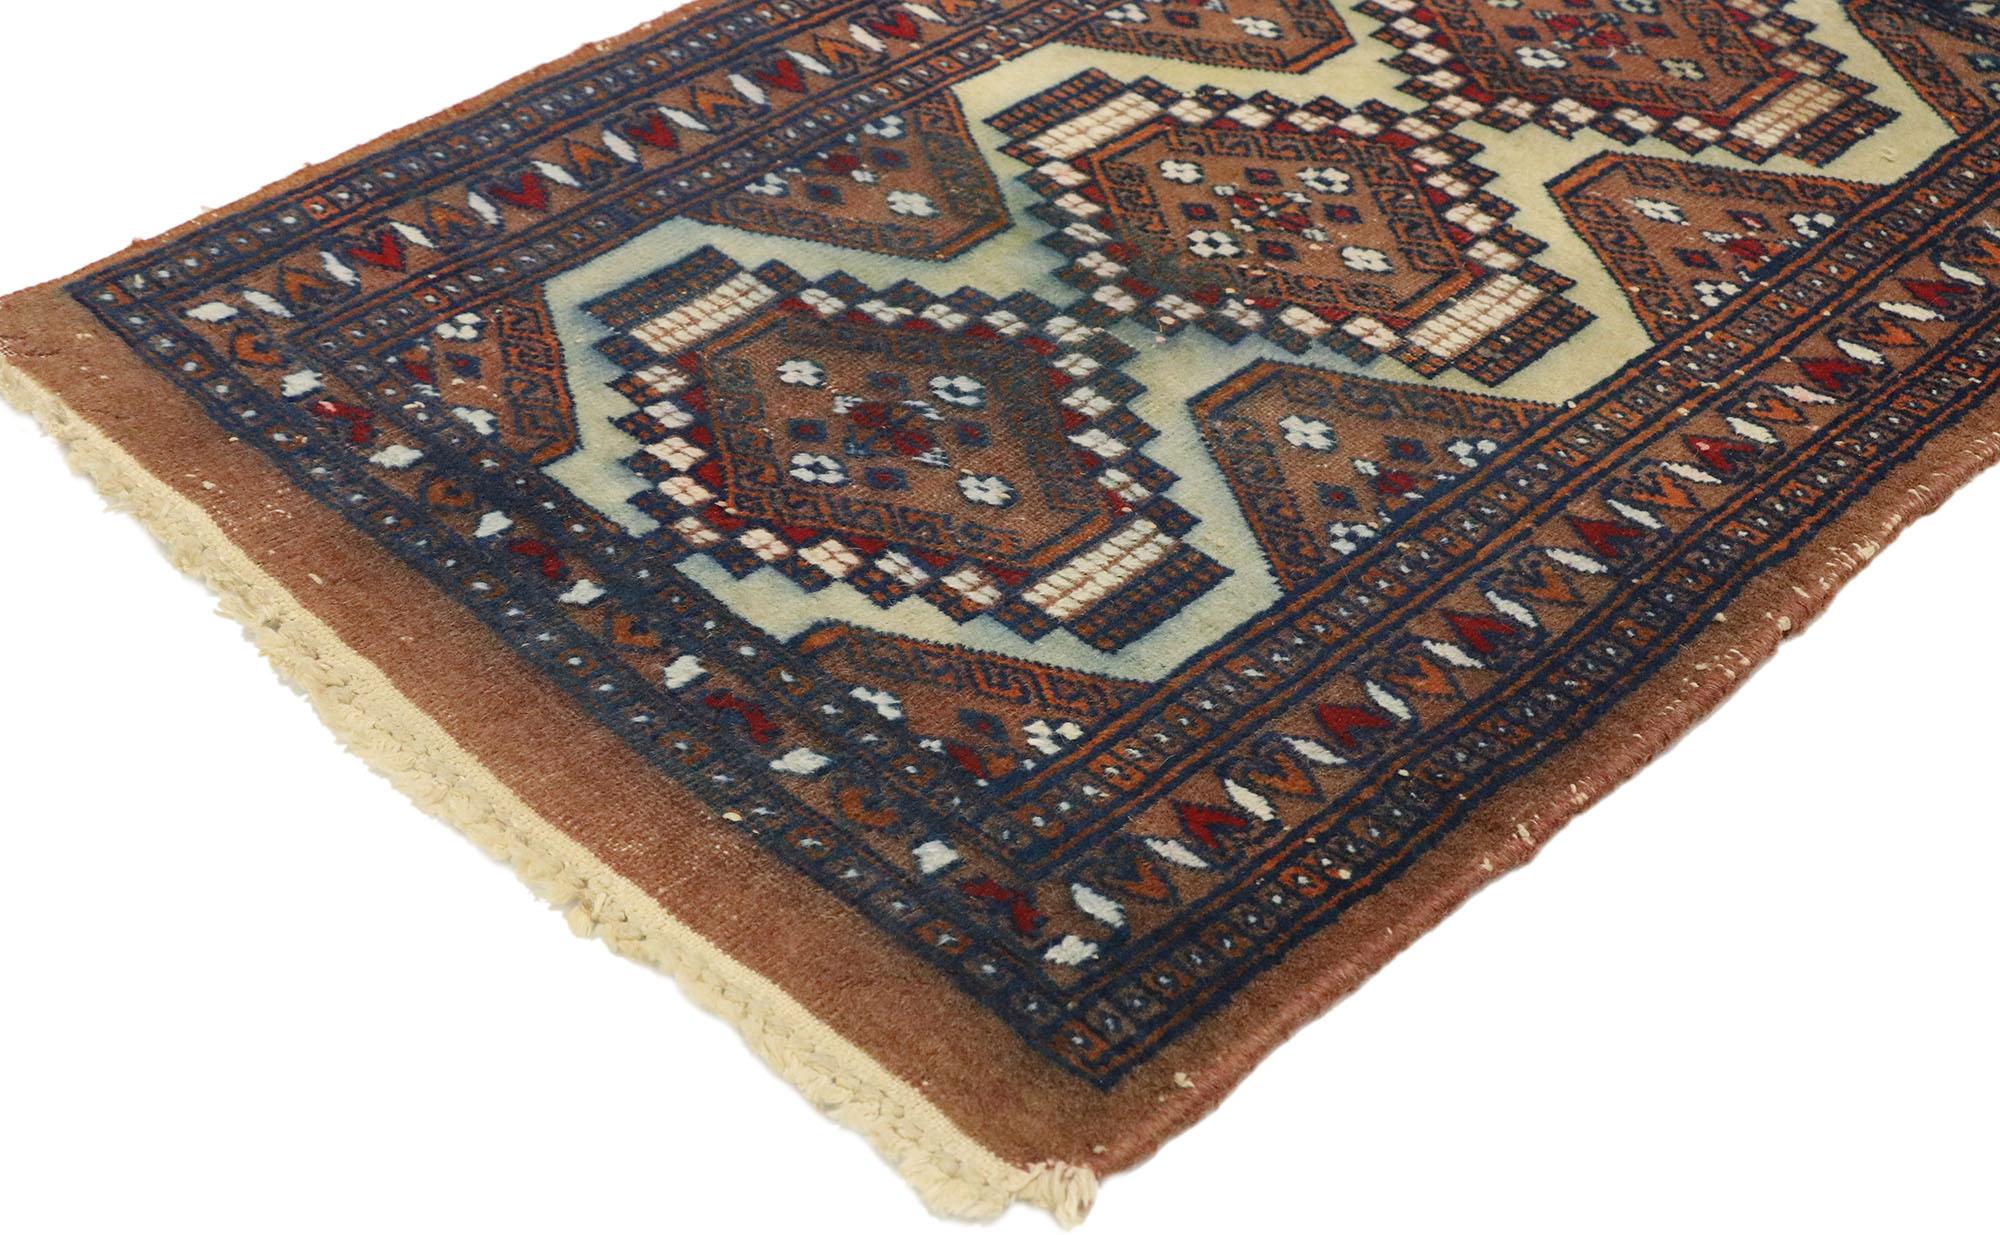 74914 Small Vintage Pakistani Rug, 01'07 x 02'02. Embark on a rugged odyssey where nomadic charm effortlessly intertwines with tribal enchantment in this hand-knotted wool vintage Pakistani rug. At the heart of its design, three commanding stepped